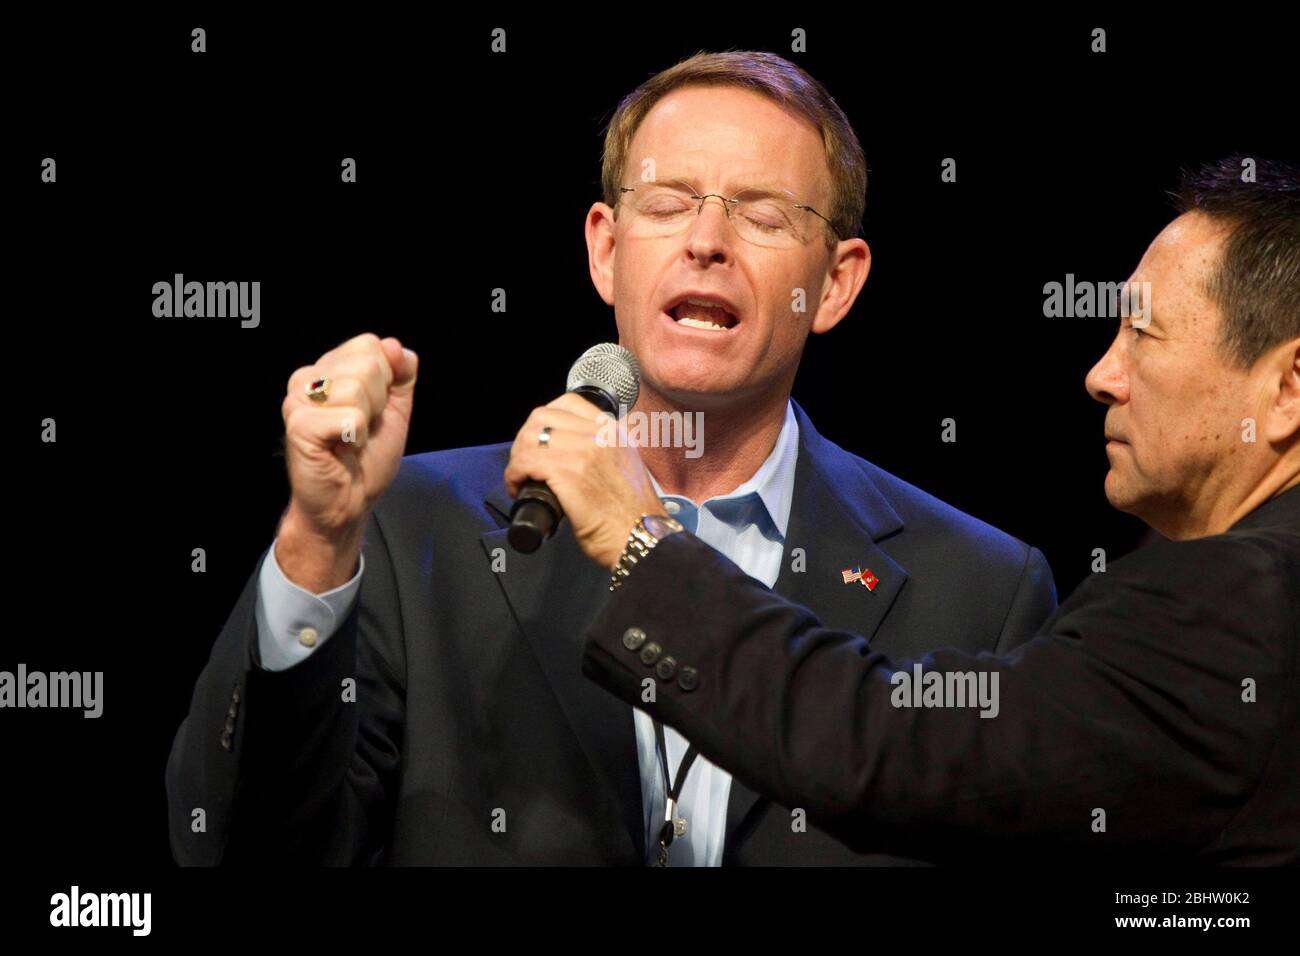 Houston Texas USA, August 6 2011: Tony Perkins, President of the Family Research Council of Washington, D.C., prays onstage during The Response, a day-long 'call to prayer for a nation in crisis' that attracted over 30,000 worshippers to hear prayers, gospel music and conservative evangelic speakers at Reliant Stadium. The event is sponsored by the American Family Association. ©Bob Daemmrich Stock Photo